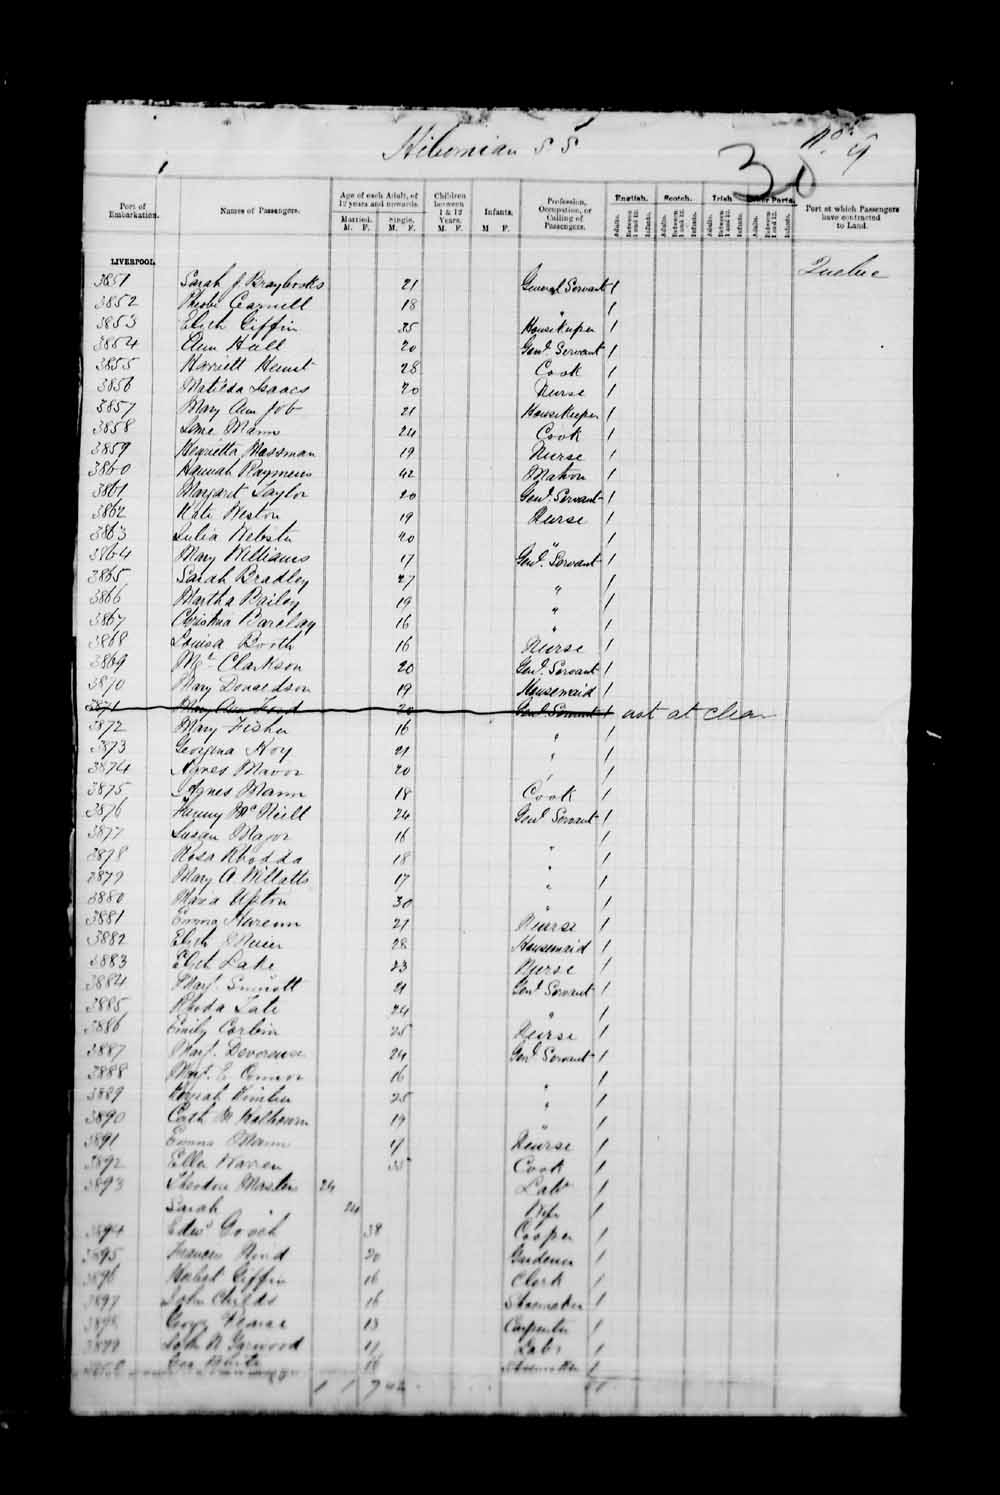 Digitized page of Passenger Lists for Image No.: e003530475